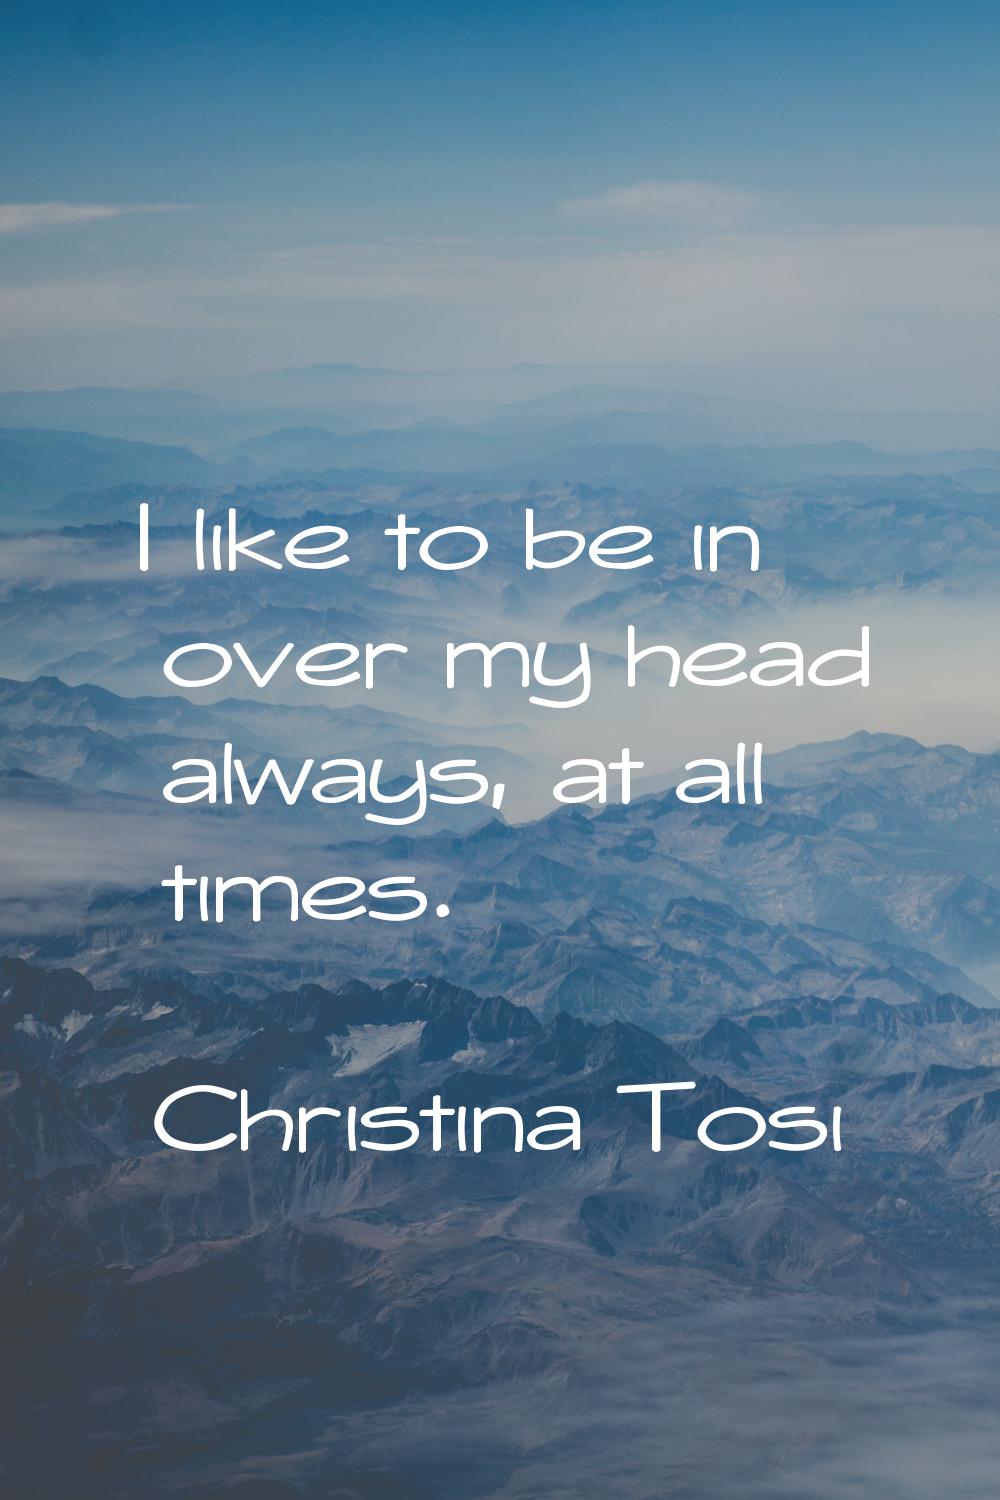 I like to be in over my head always, at all times.